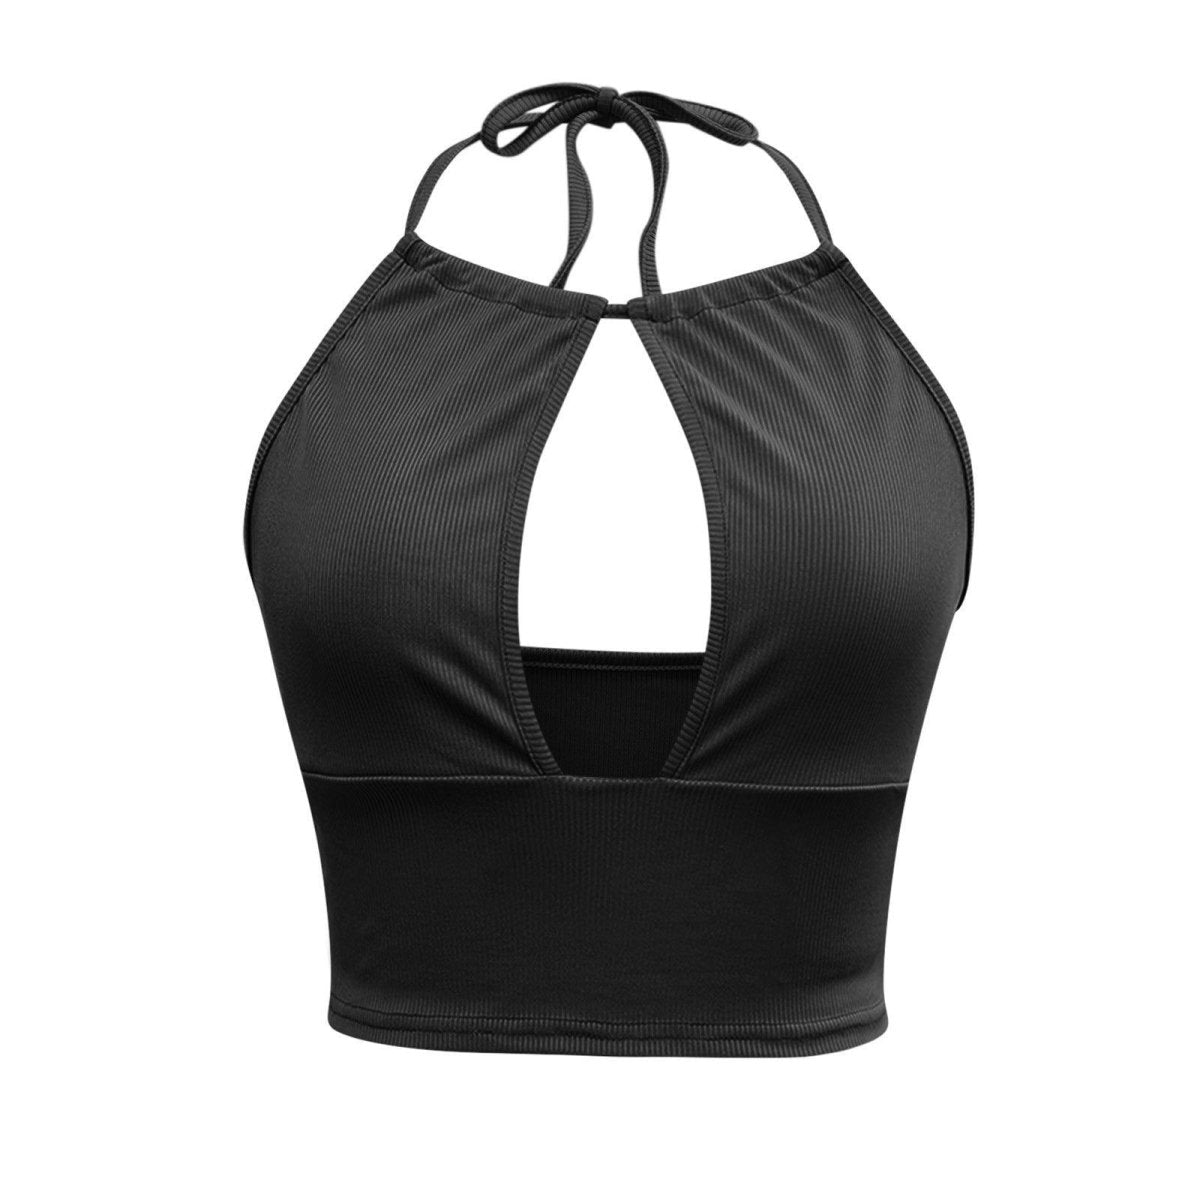 TrendyAffordables | Women's Hollow Halter Camisole for Stylish Summer Comfort - TrendyAffordables - 4